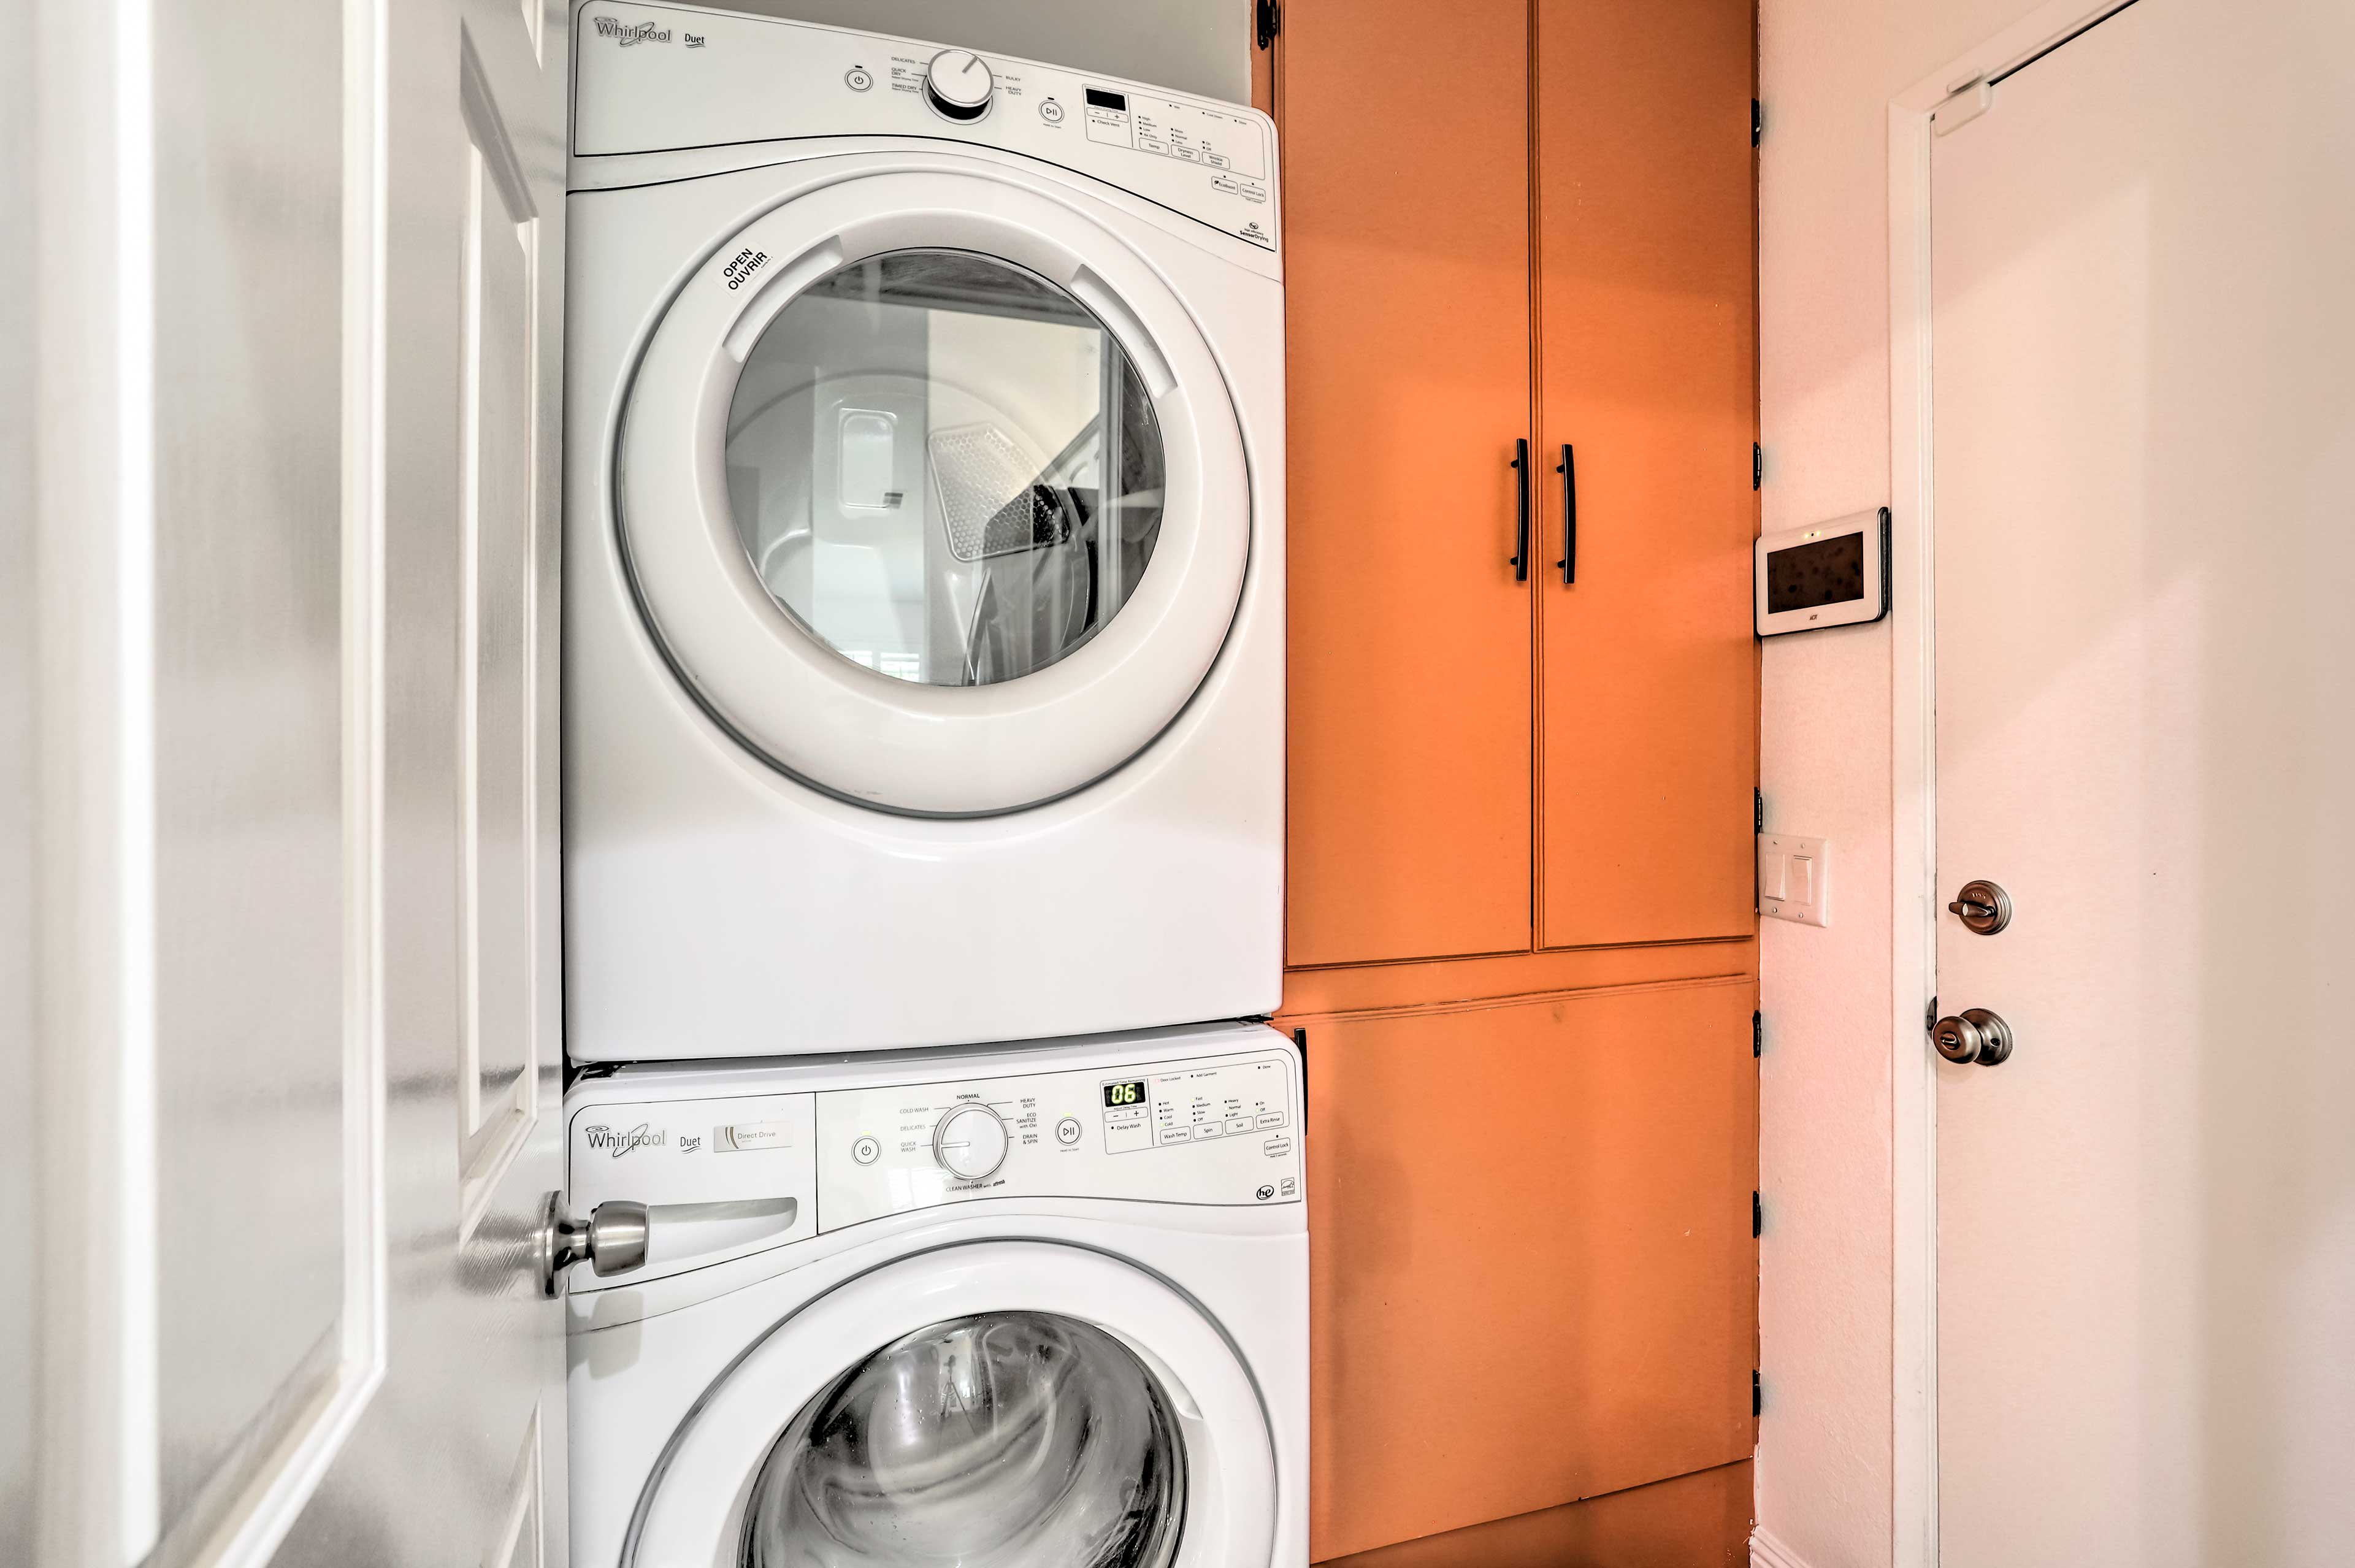 Laundry Area | Washer/Dryer | Laundry Detergent | Clothes Steamer | Iron/Board